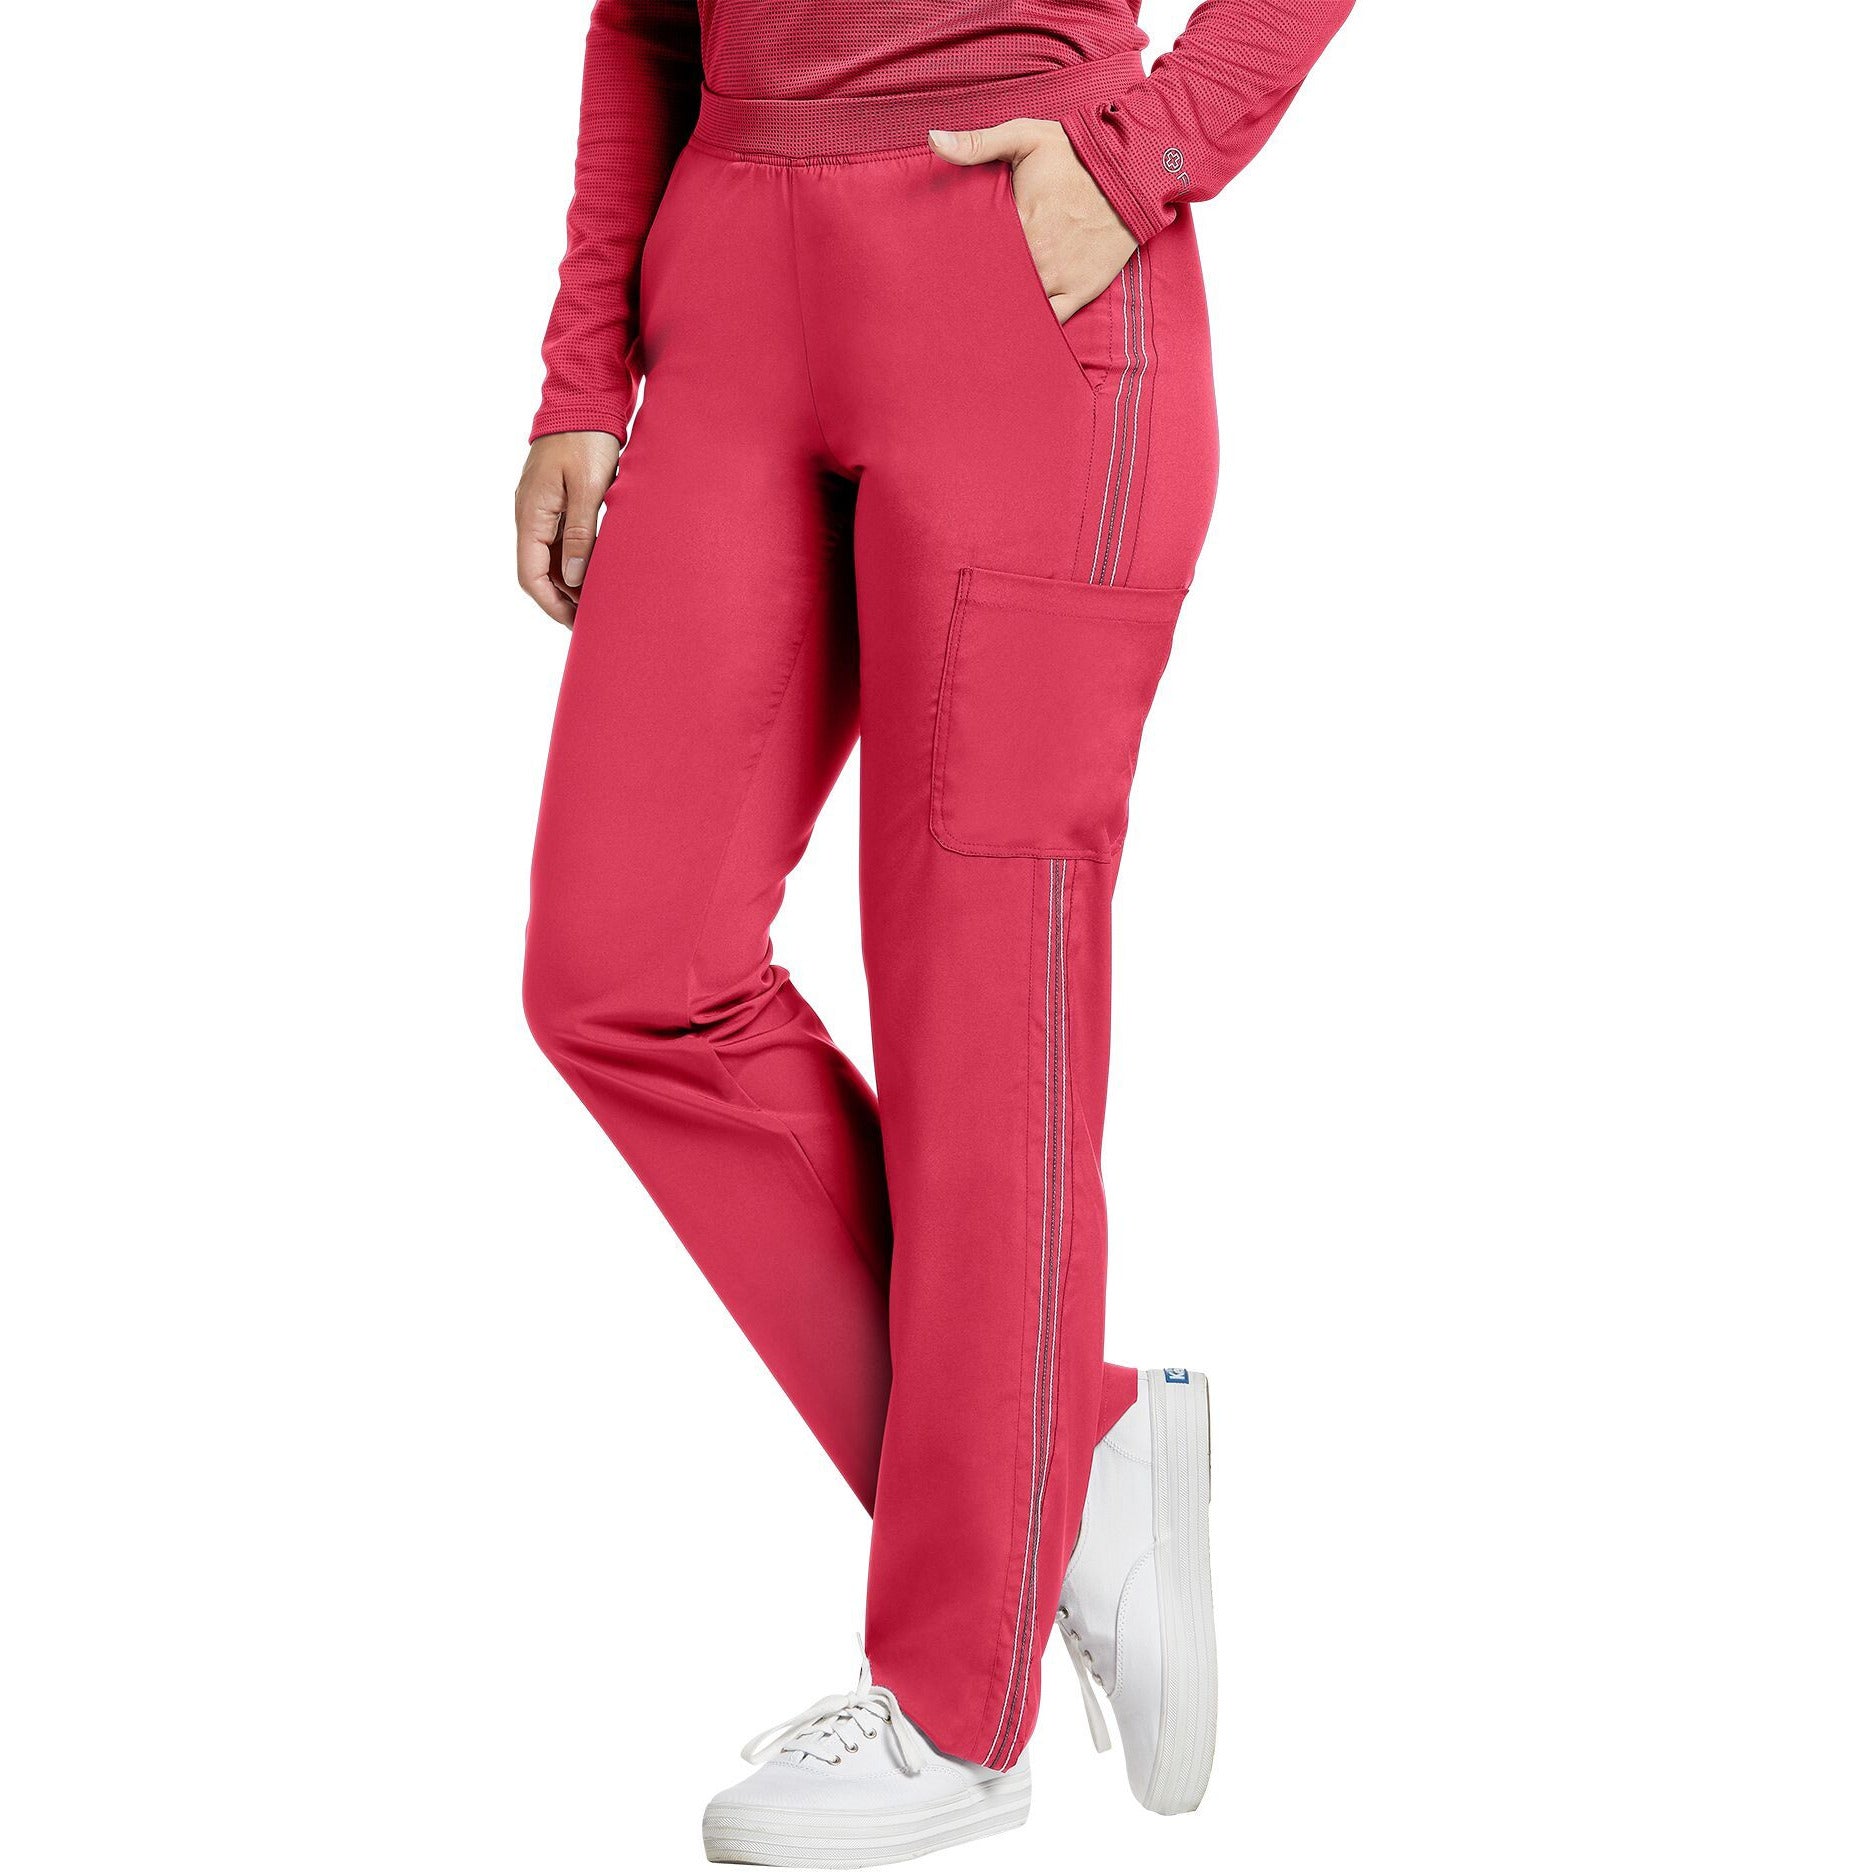 $22.95 for Women's Yoga Pants with Pockets